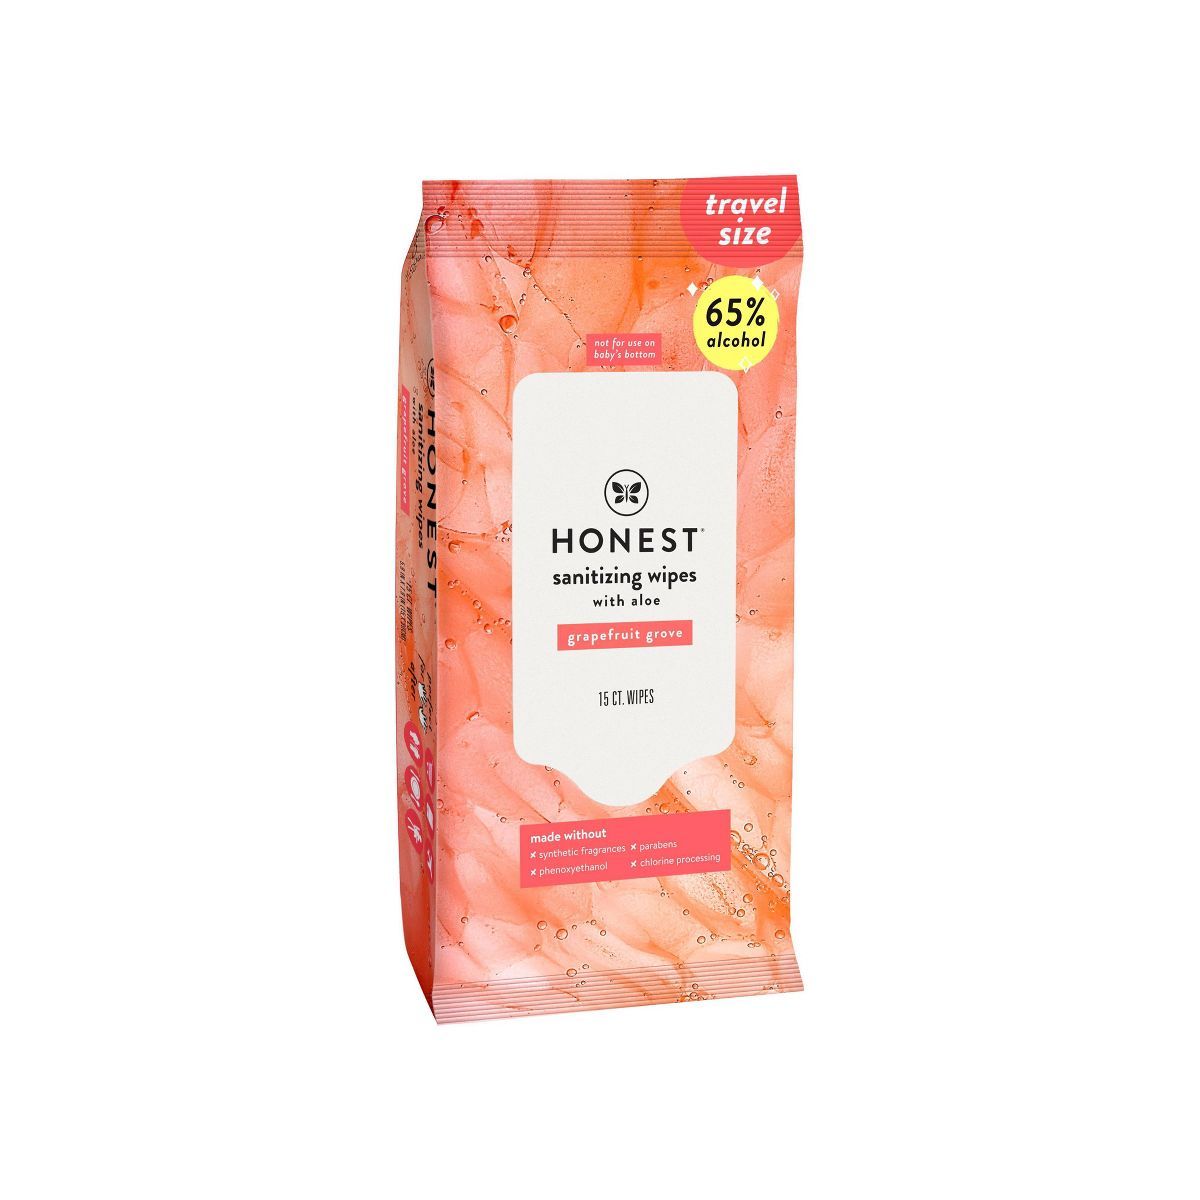 The Honest Company Alcohol Hand Sanitizing Wipes - Grapefruit Grove - 15ct | Target